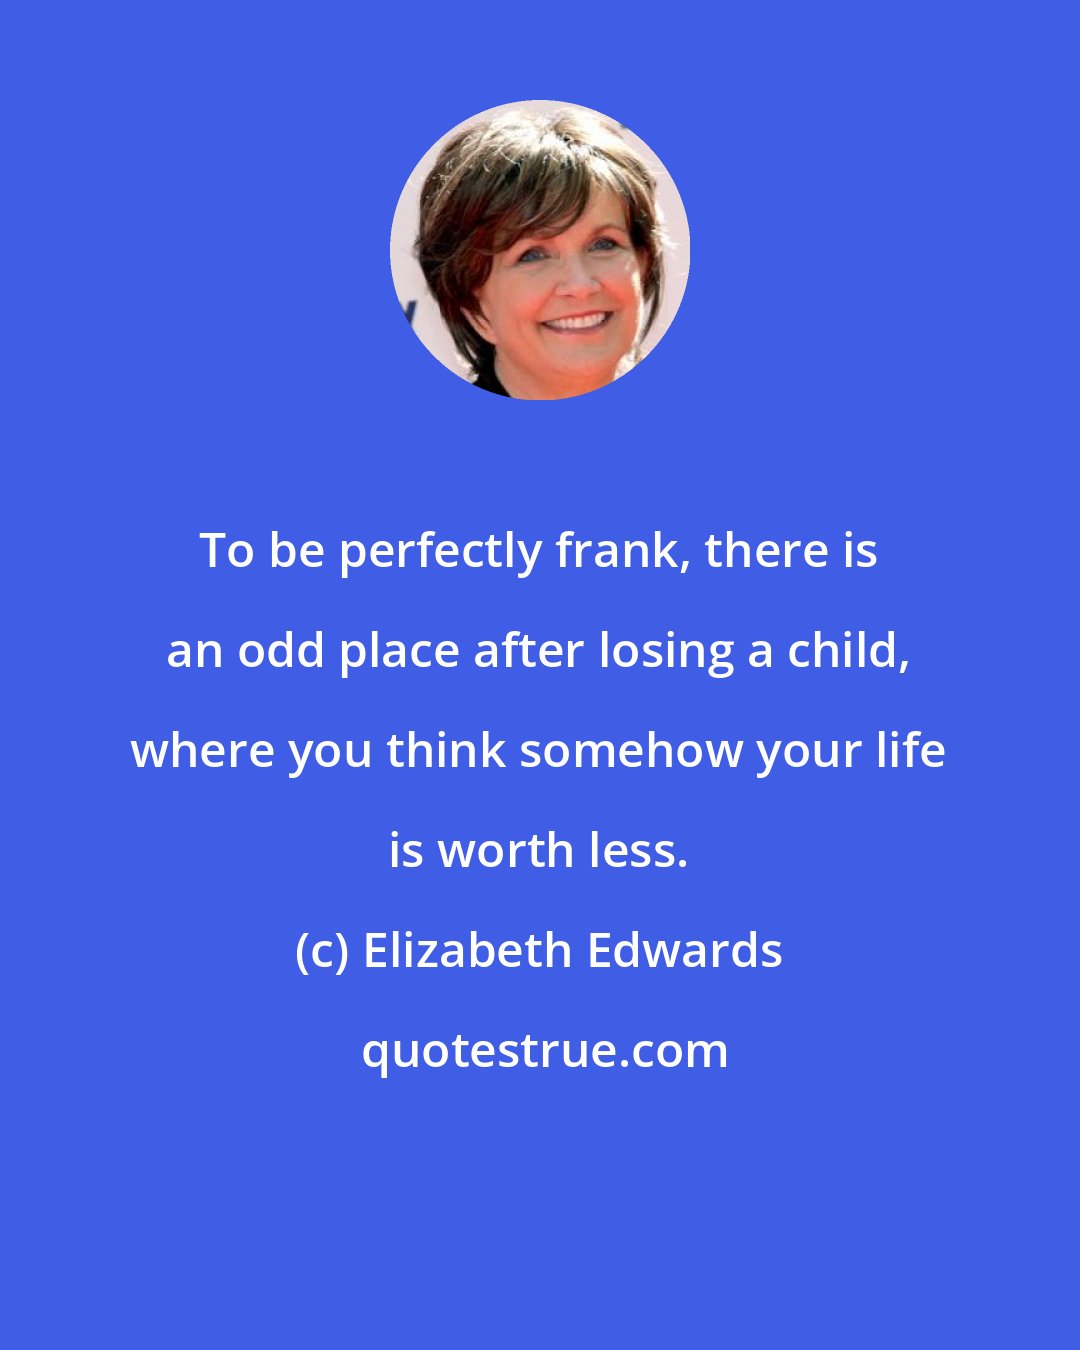 Elizabeth Edwards: To be perfectly frank, there is an odd place after losing a child, where you think somehow your life is worth less.